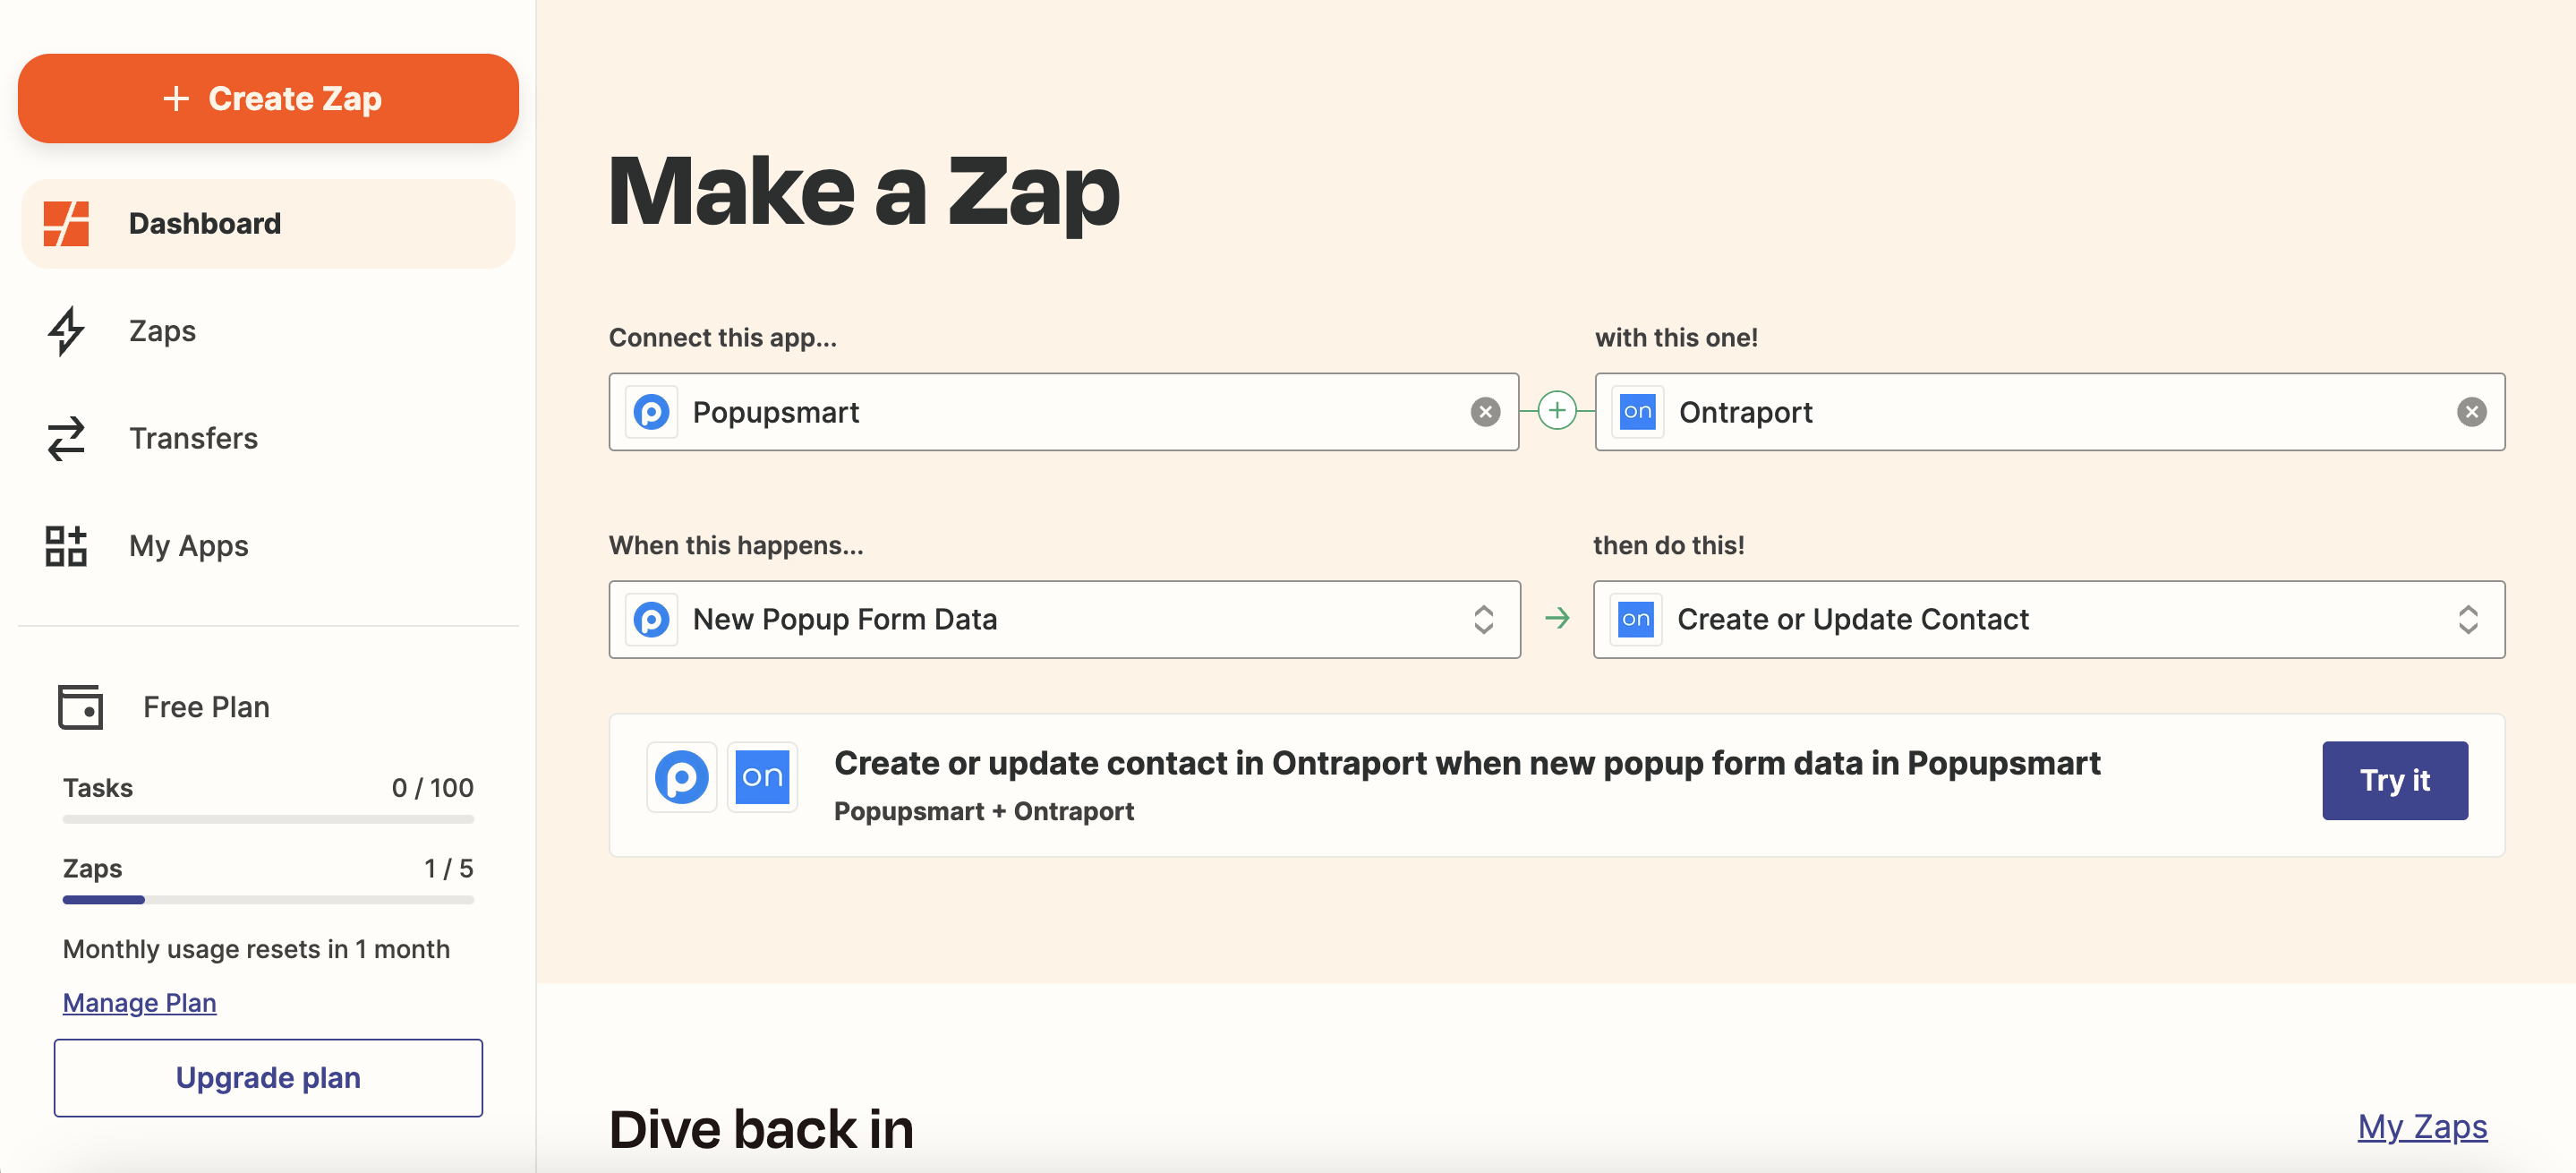 Log in to your Zapier account and connect your application